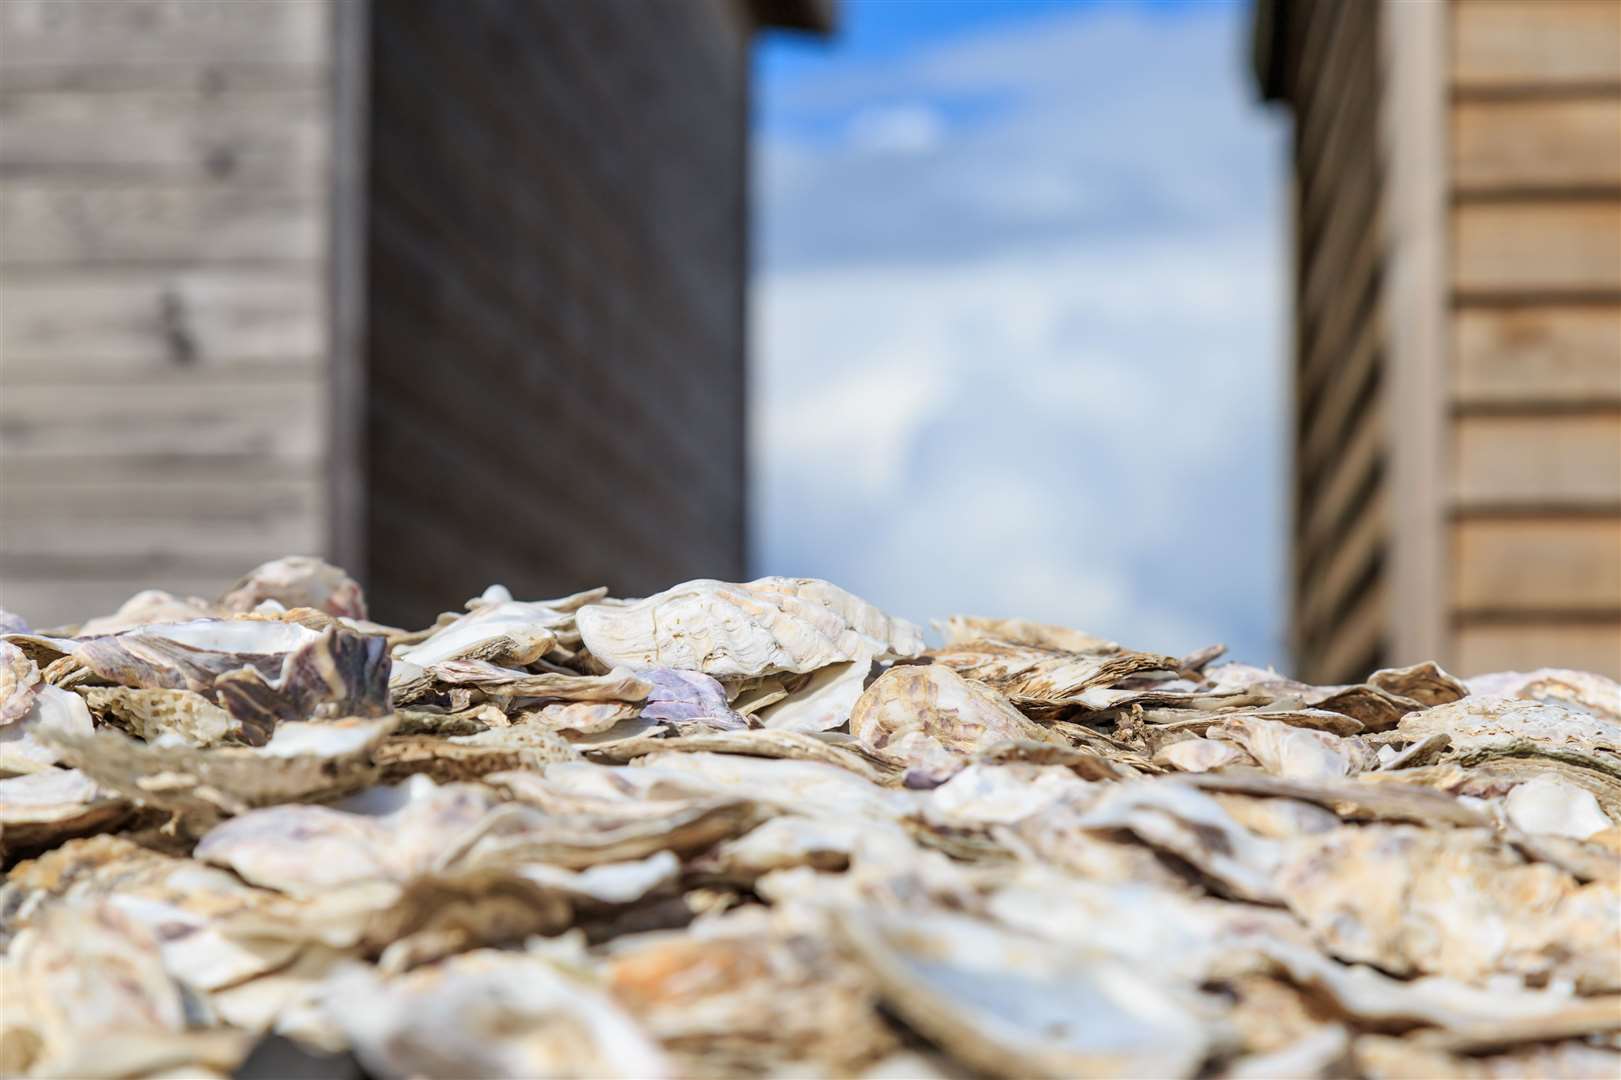 The oyster festival is back in Whitstable this weekend